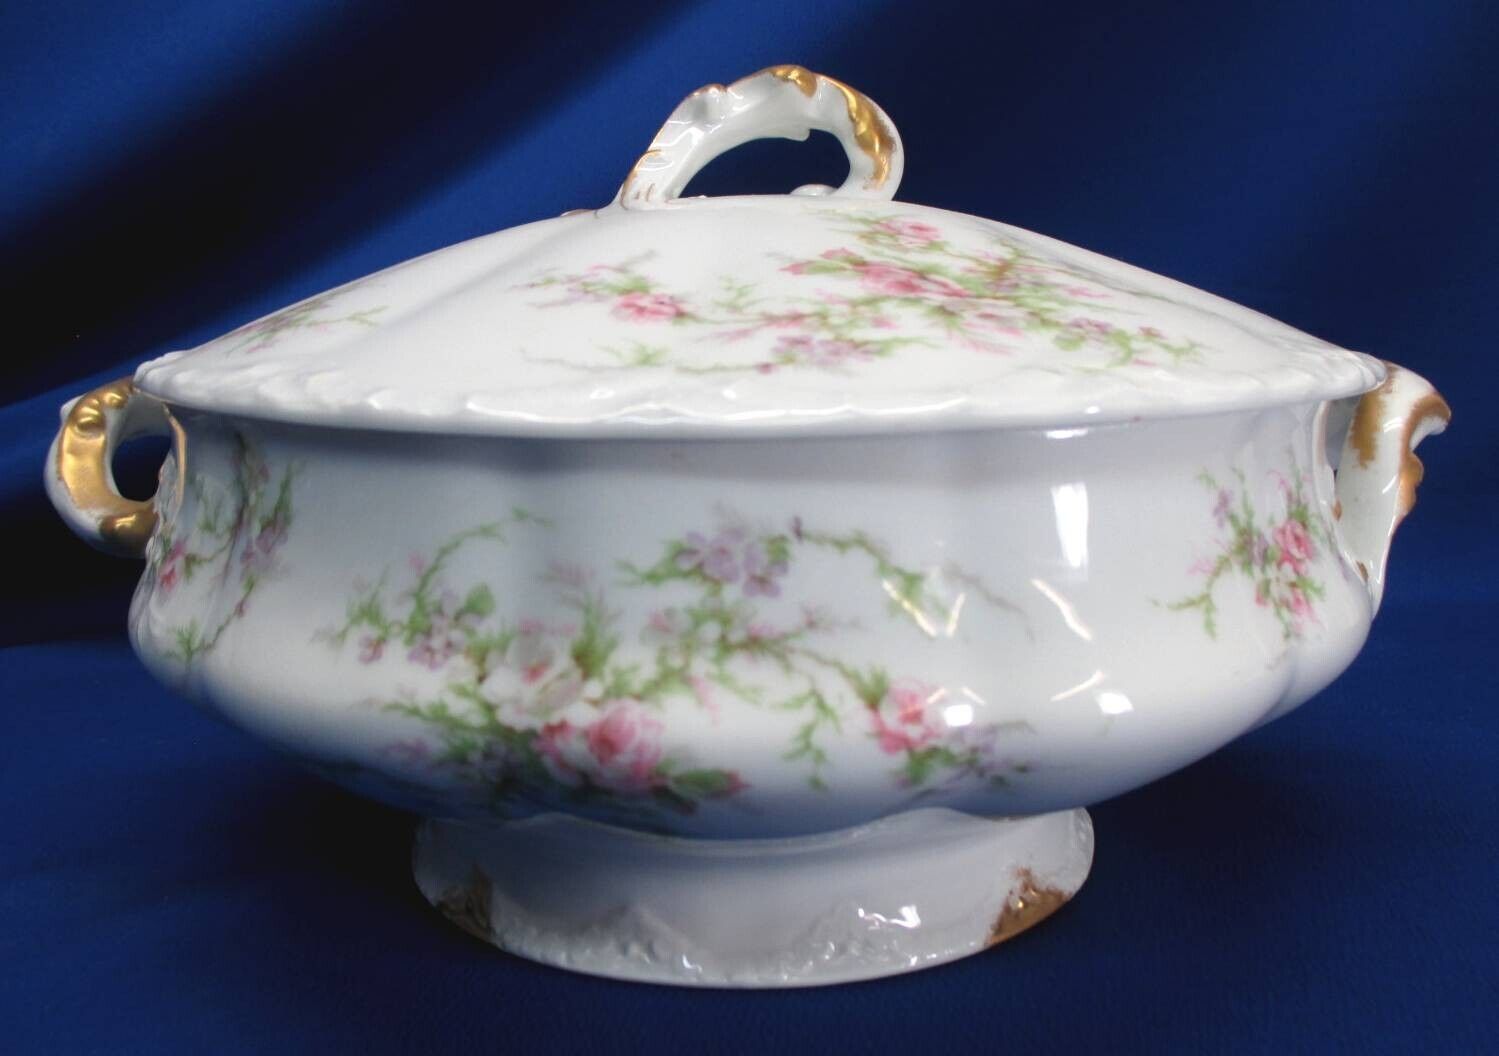 LARGE ROUND AND BEAUTIFUL THEODORE HAVILAND LIMOGES PINK ROSE SPRAYS SOUP TUREEN